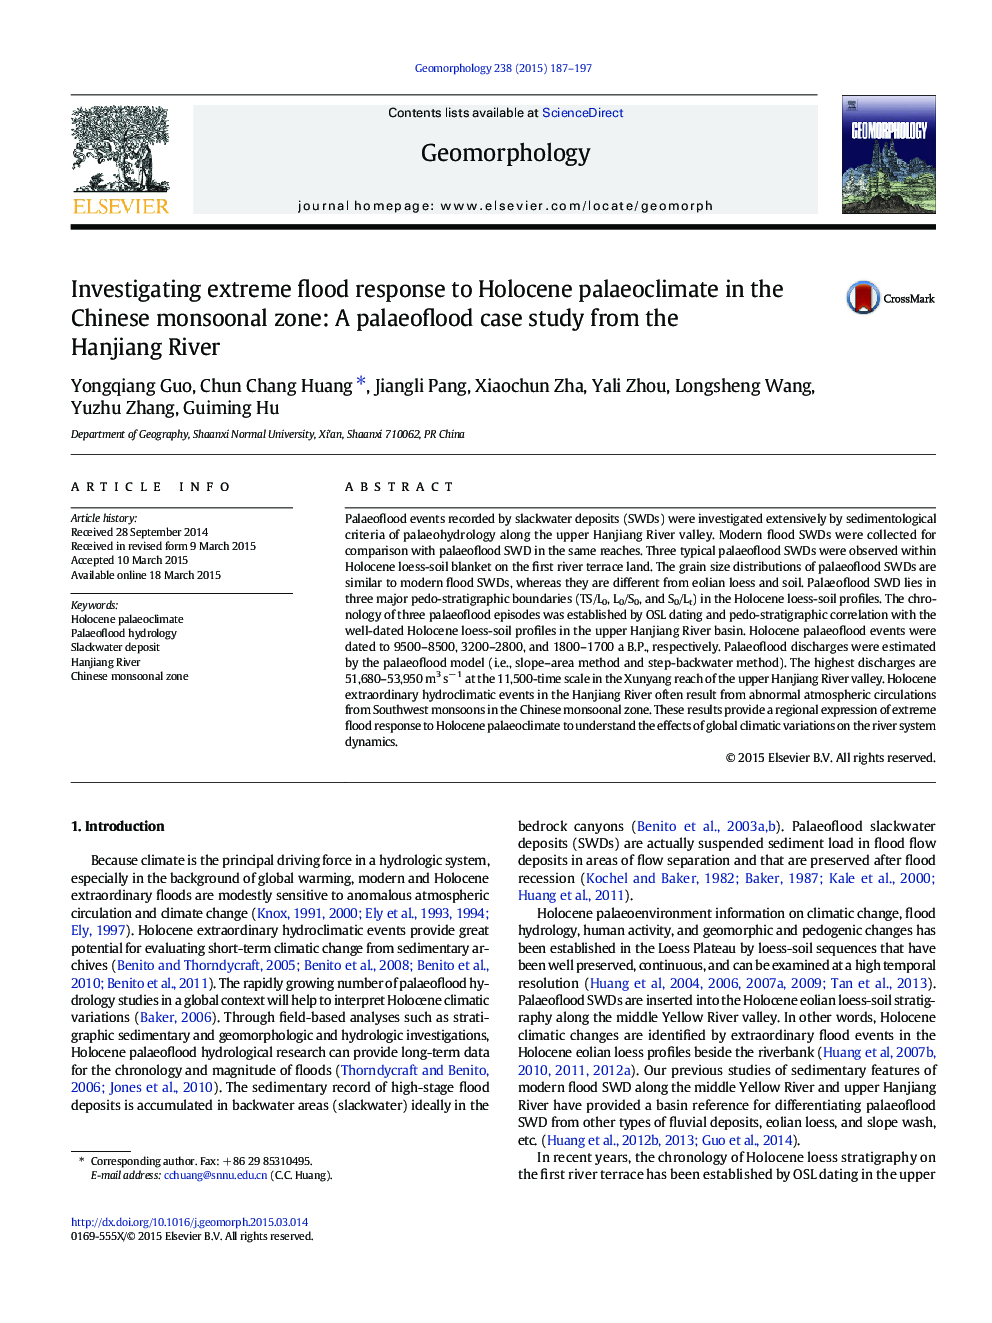 Investigating extreme flood response to Holocene palaeoclimate in the Chinese monsoonal zone: A palaeoflood case study from the Hanjiang River